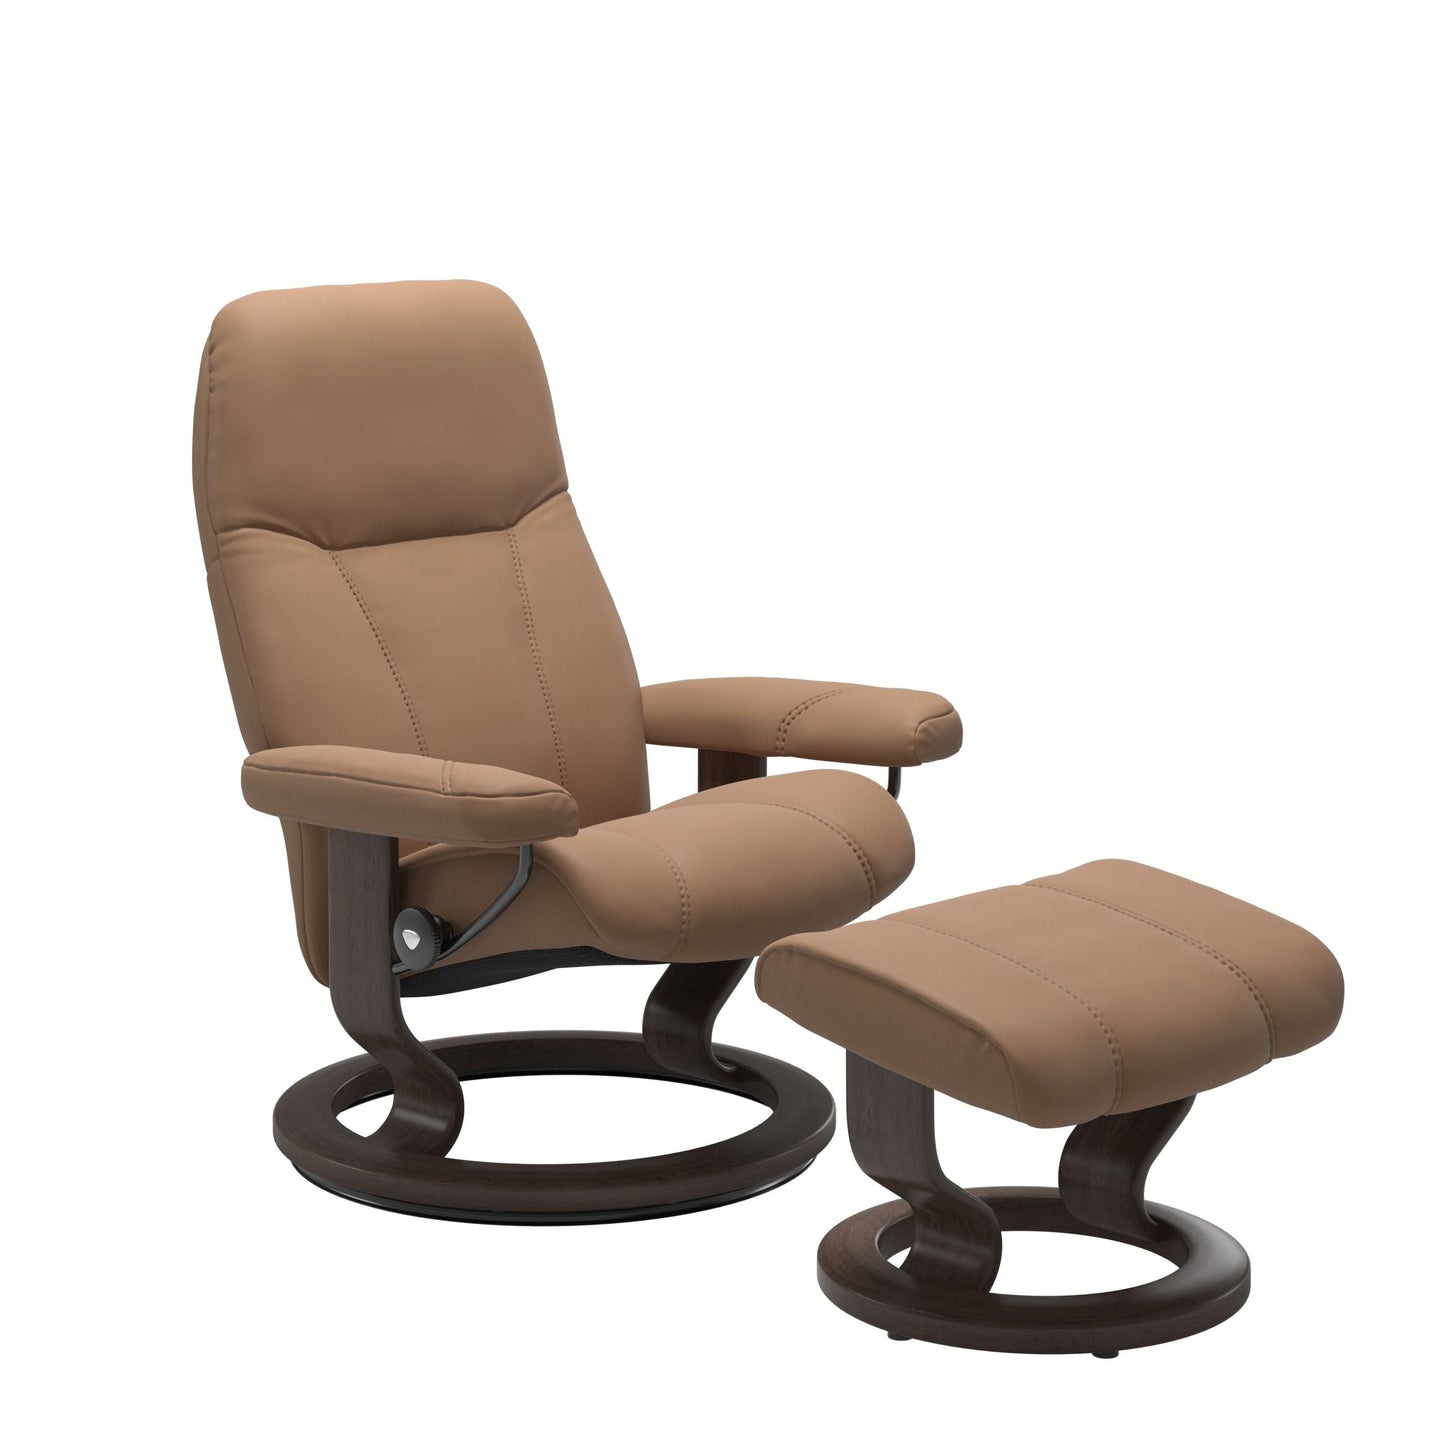 Consul Large Recliner Chair & Stool Classic Base by Stressless